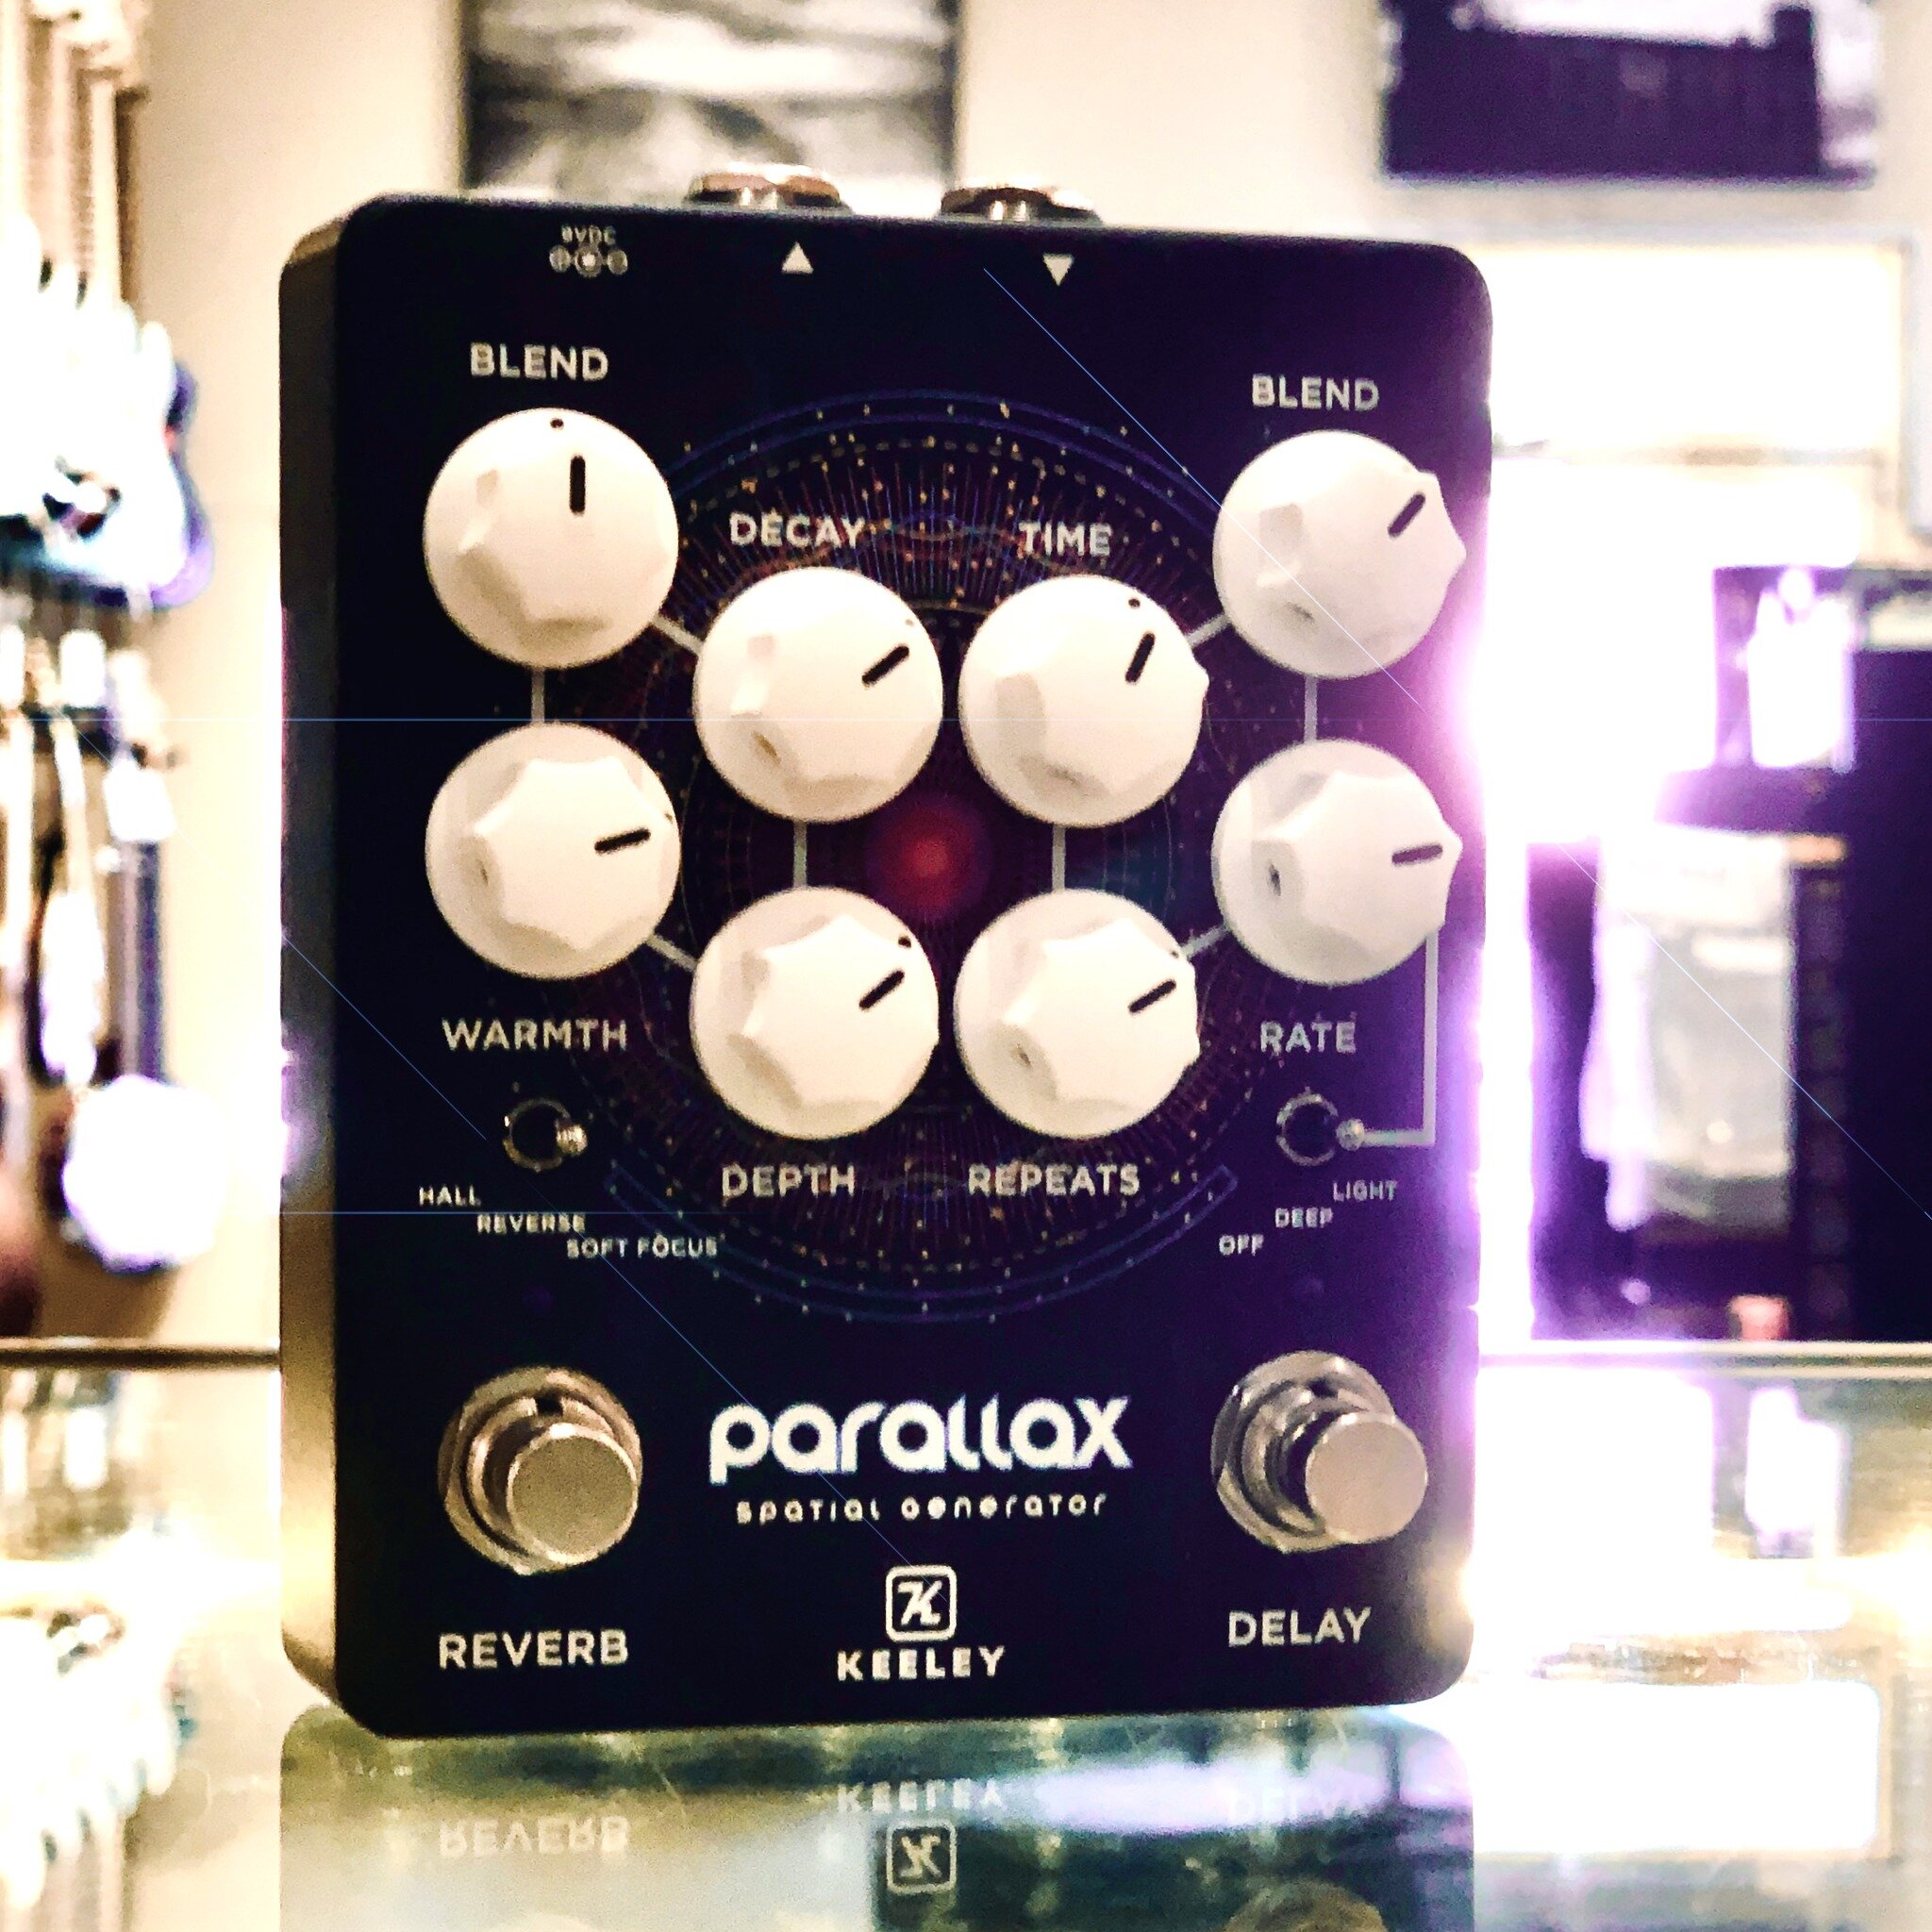 The Parallax pairs the delay side of the legendary Caverns with the space-shifting Shoegaze-inspired reverbs of the Realizer. On one side, analog-style modulated delays create a soft bed of warm repeats, while the other side features Reverse setting-